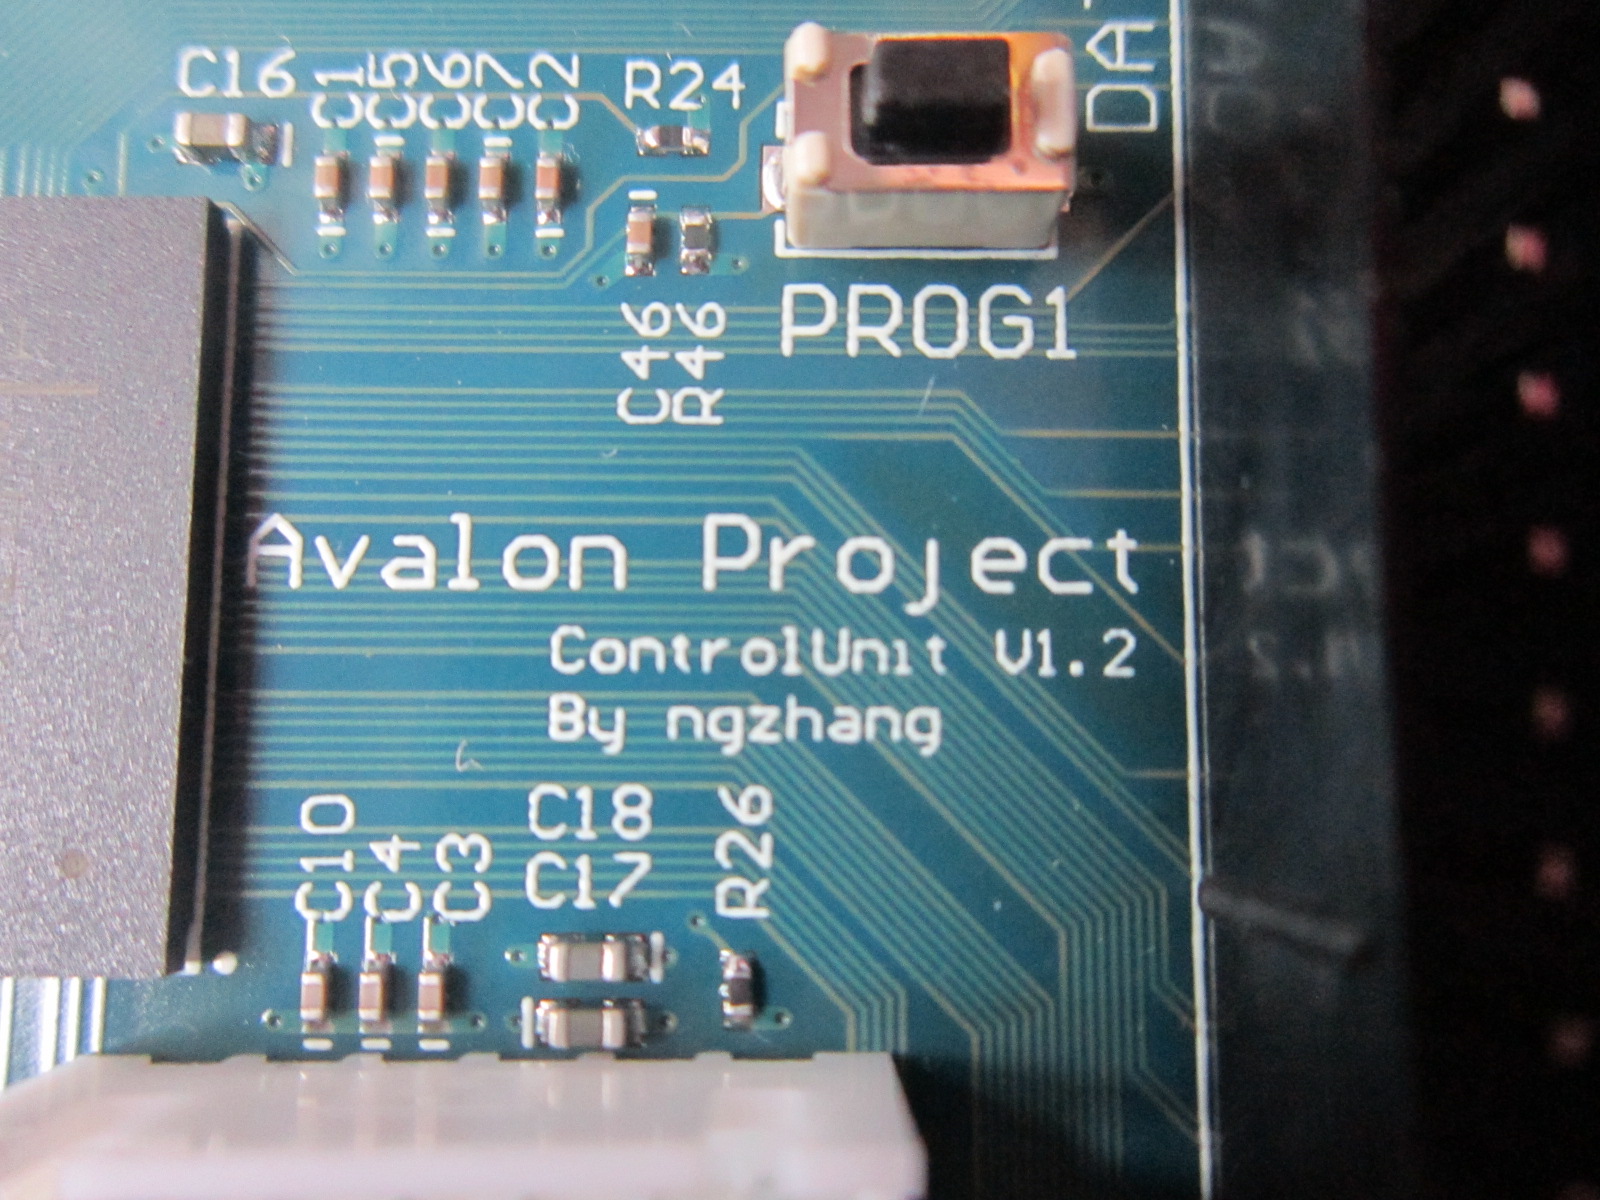 Thumbnail for File:Avalon-controlunit-v1.2-by-ngzhang.JPG